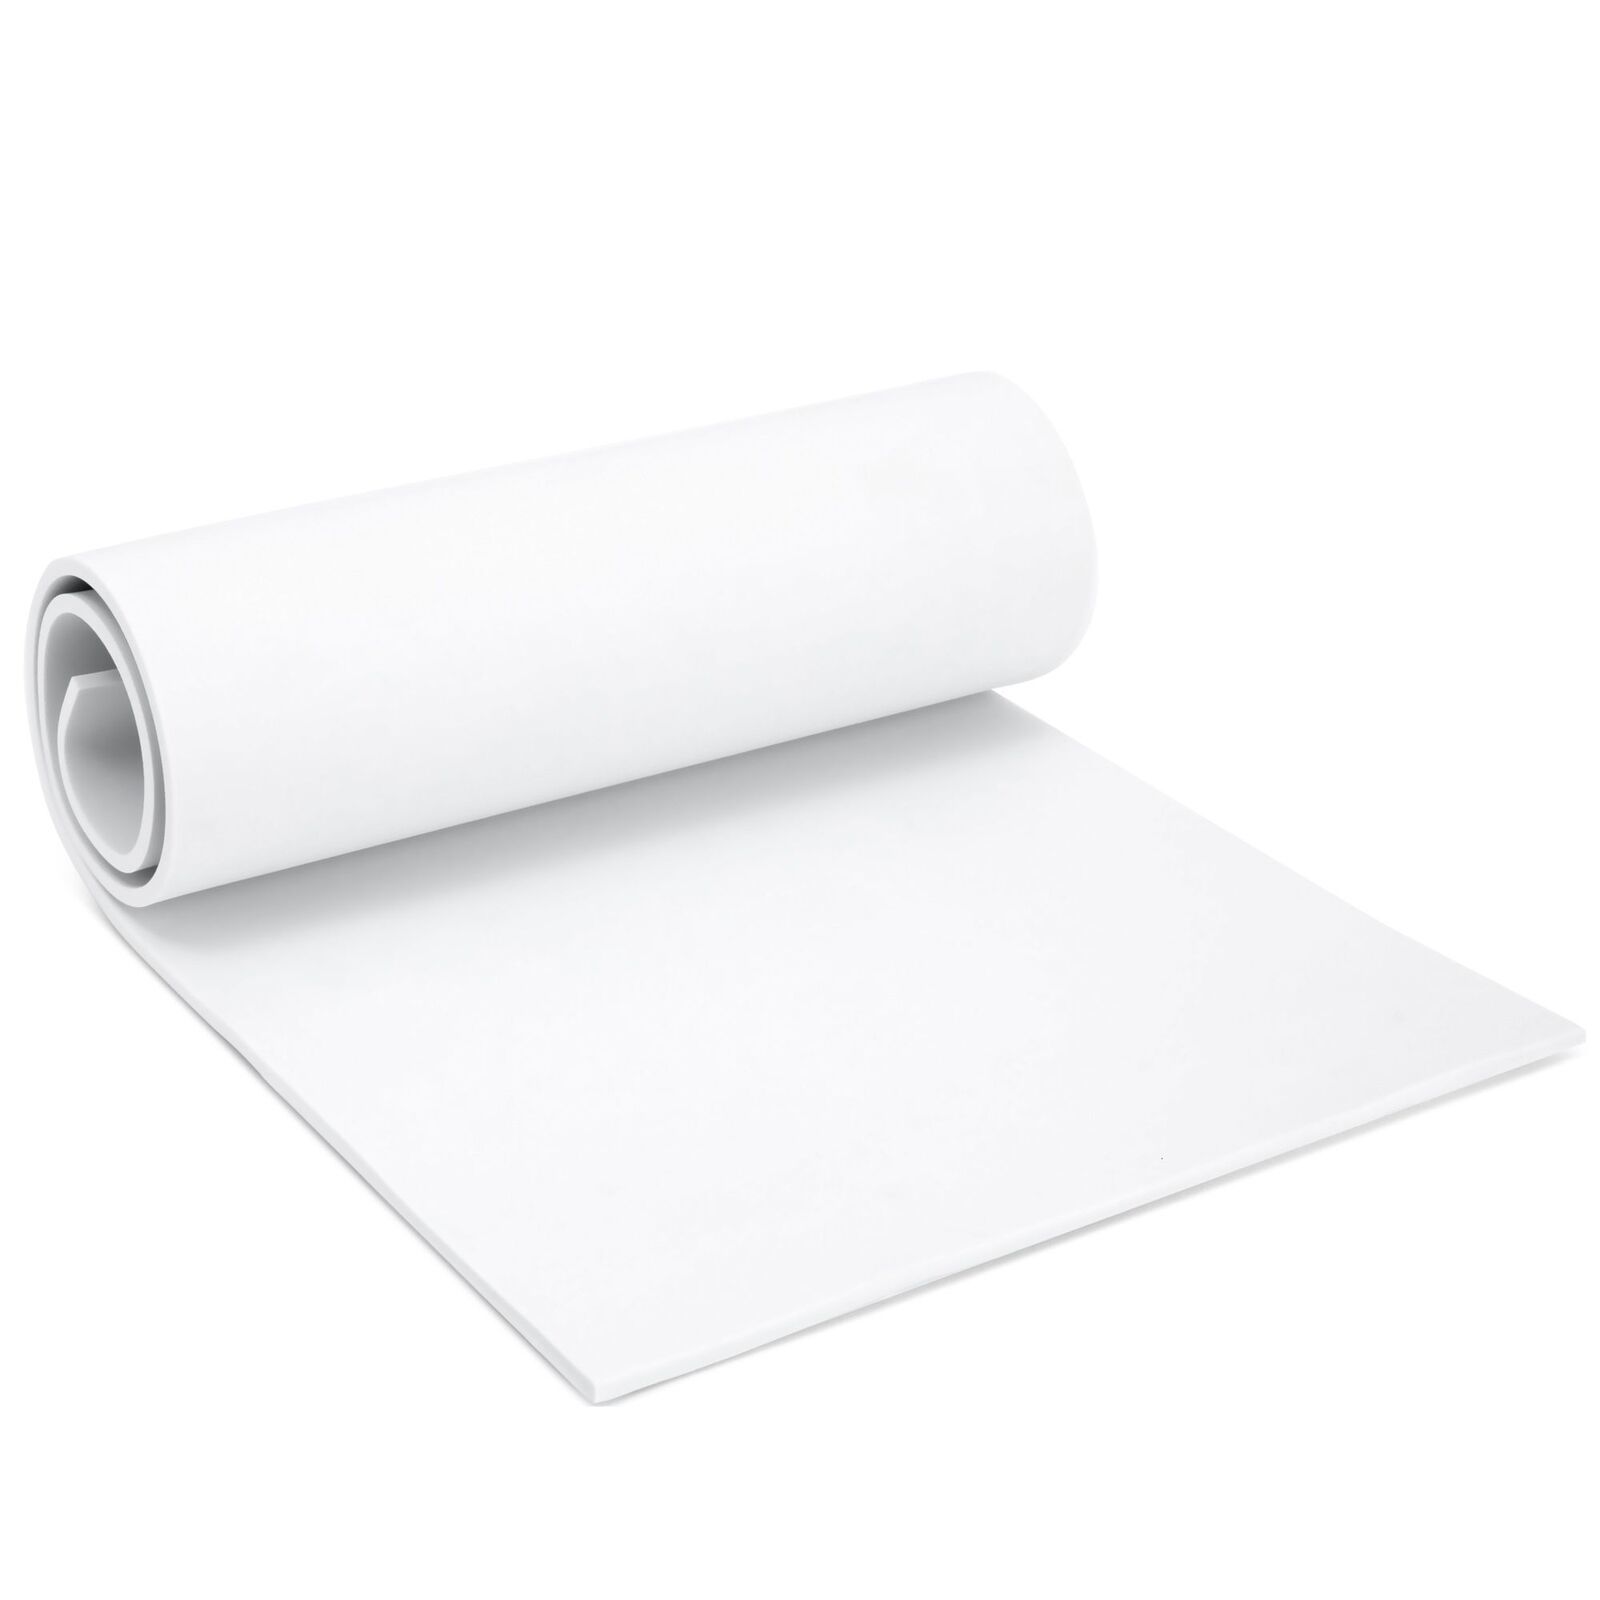 Primary image for White 6Mm Eva Foam Sheets For Crafting, Cosplay, Diy Crafts, 14 X 39 In